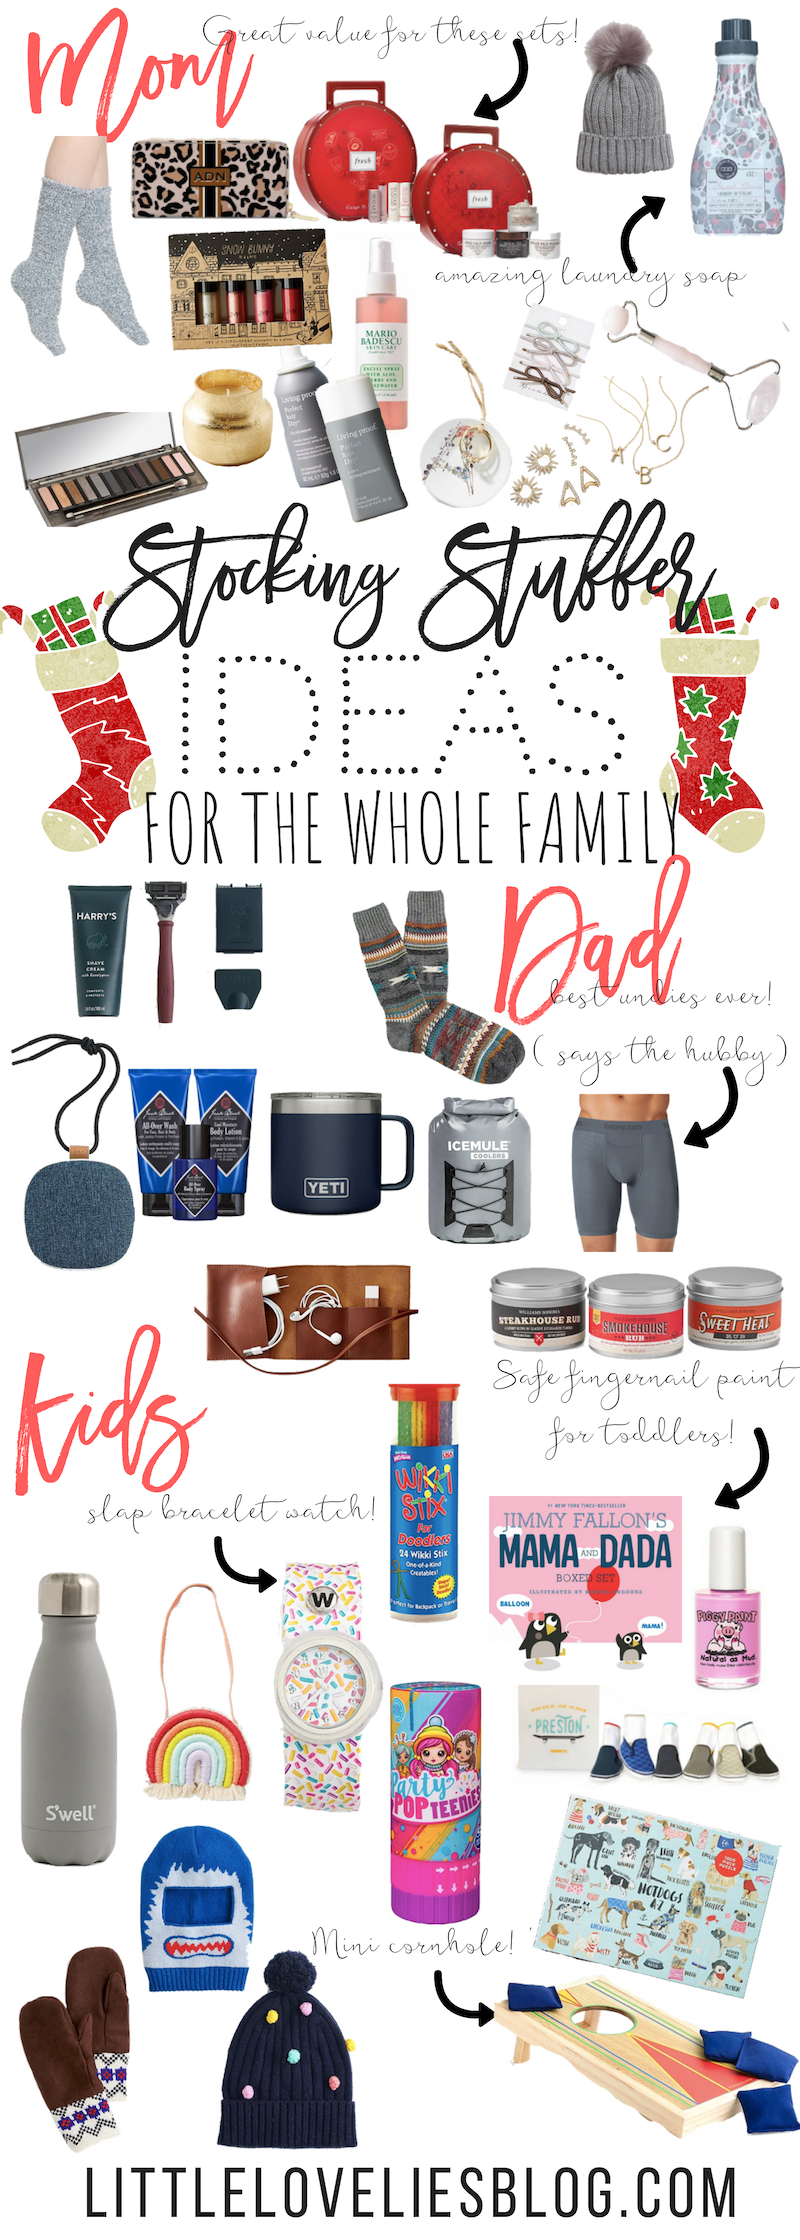 10 Amazing Stocking Stuffers for the Whole Family - Edible® Blog